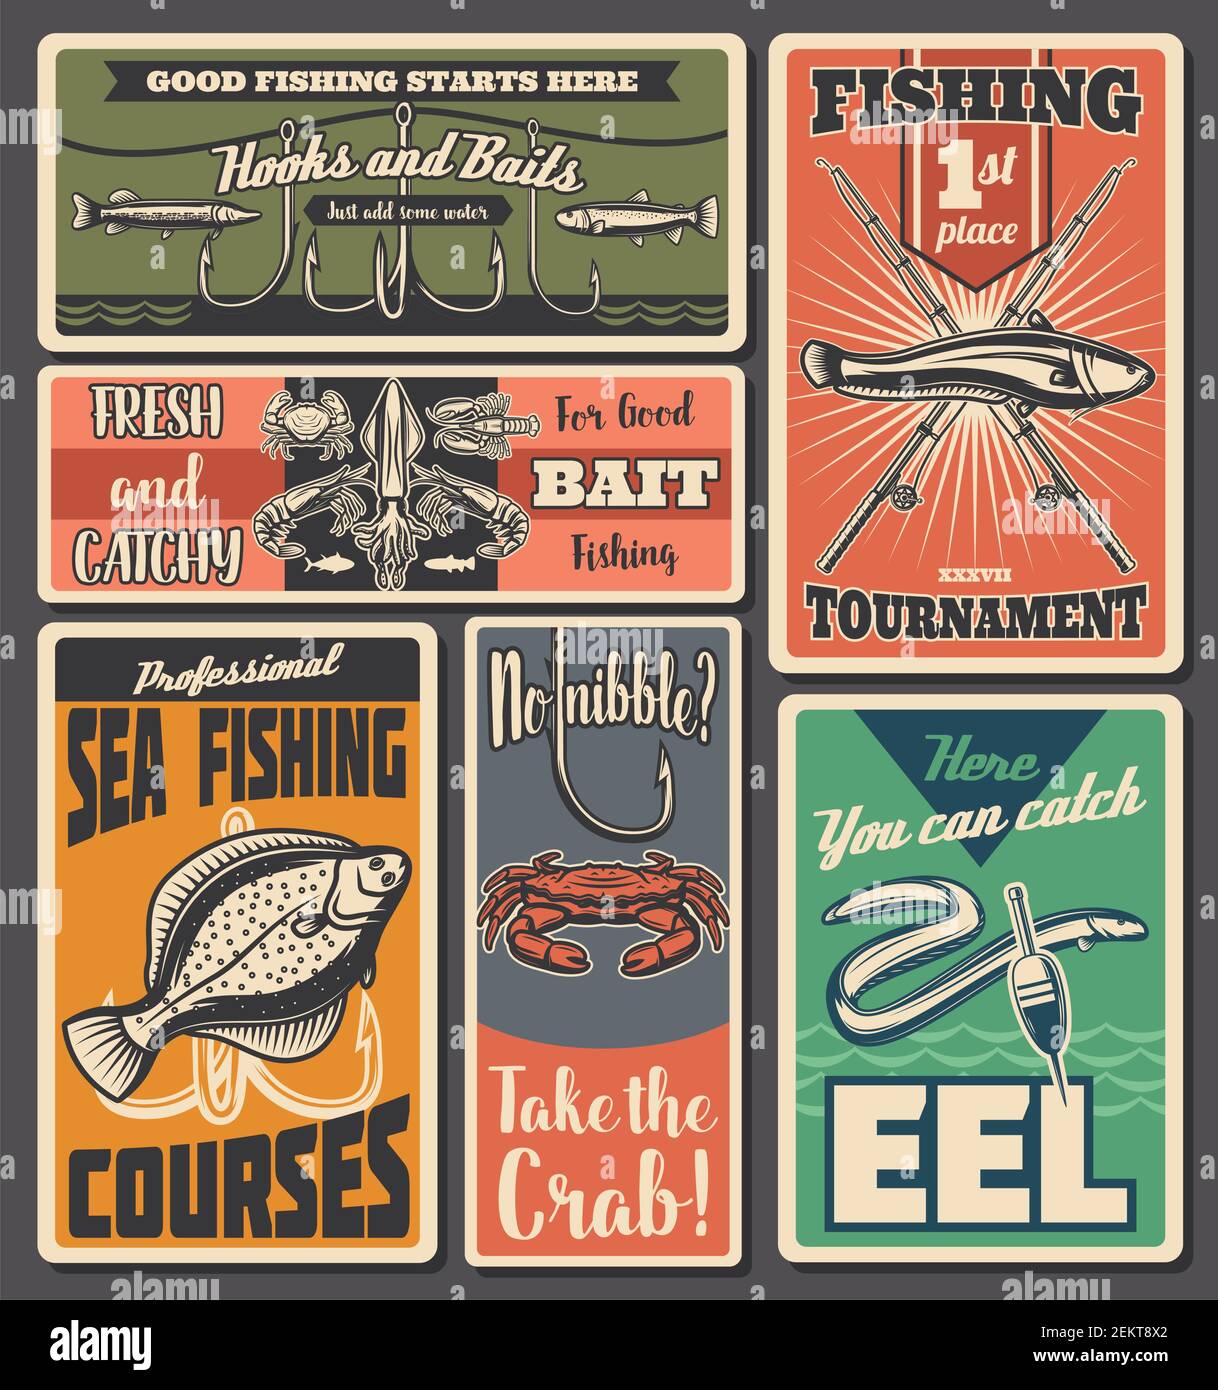 Vintage fishing floats Stock Vector Images - Alamy